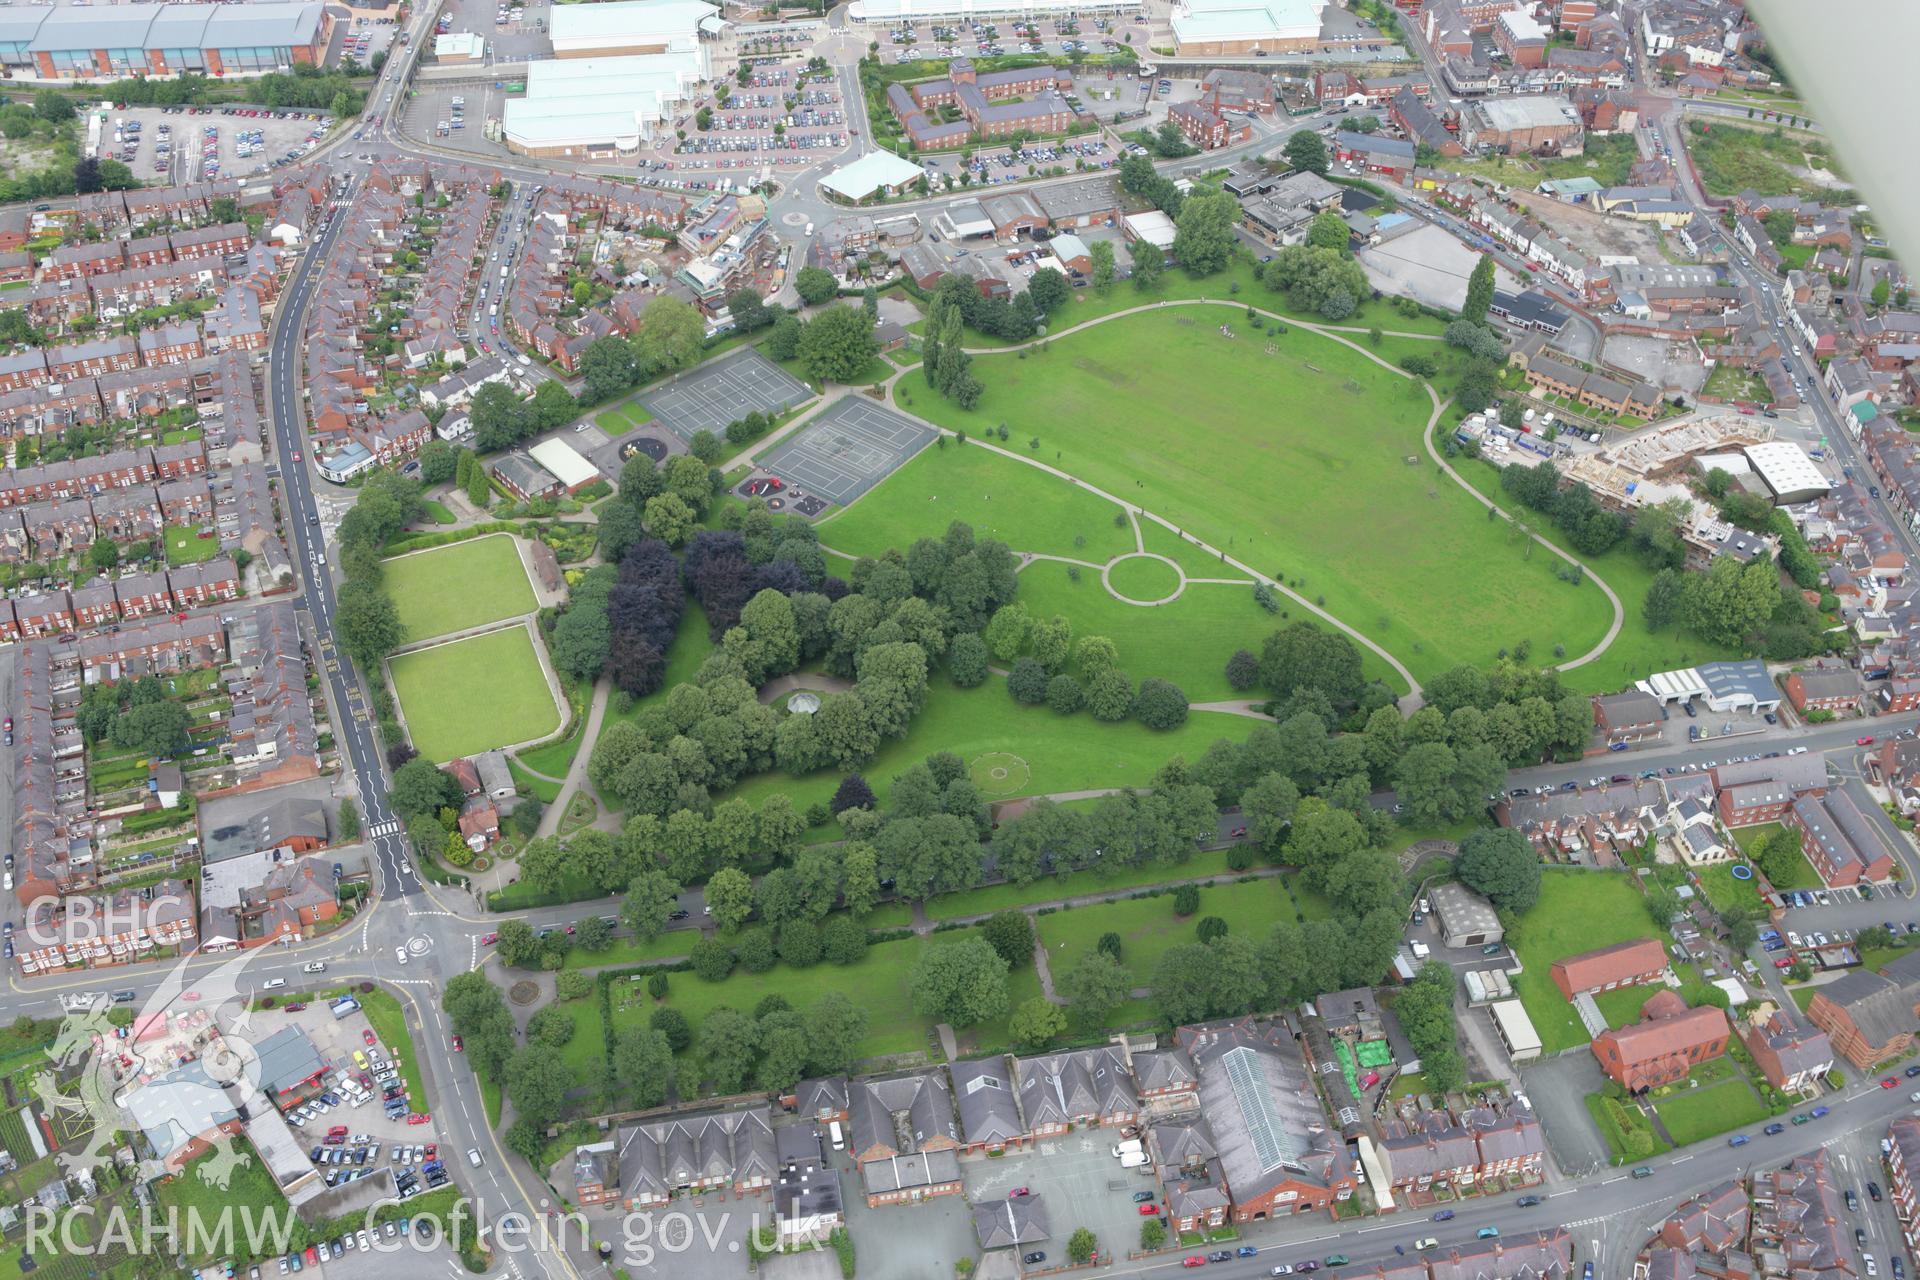 RCAHMW colour oblique aerial photograph of Wrexham showing a park. Taken on 24 July 2007 by Toby Driver